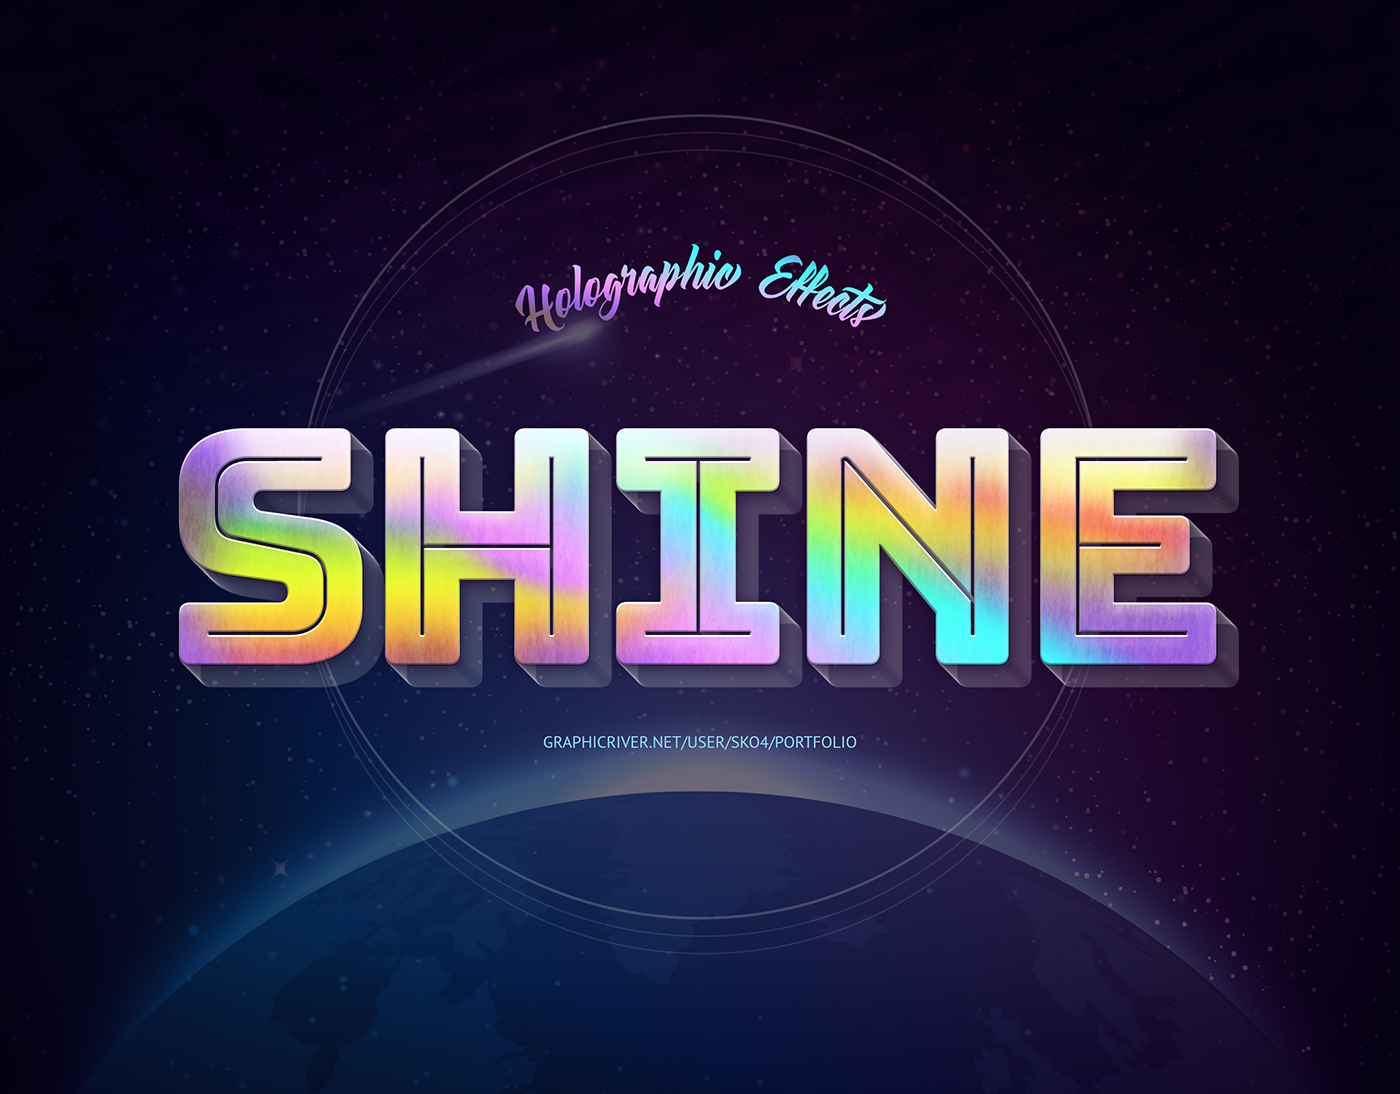 Holographic Text Effects vol 1, Add-ons | GraphicRiver